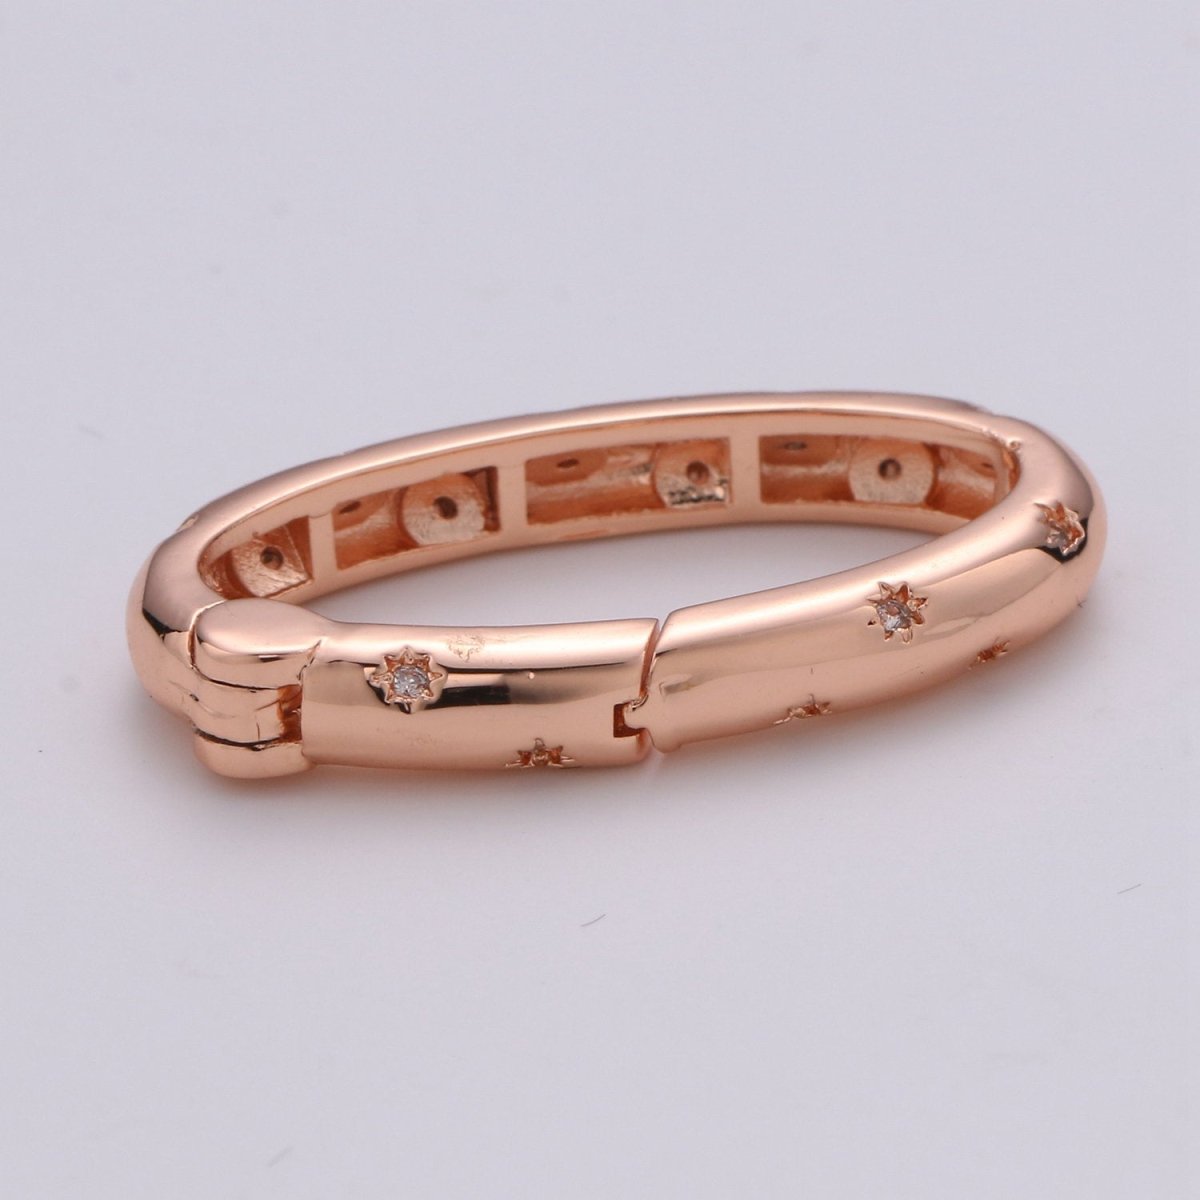 Gold Spring Gate Ring, Push Gate ring, 30X15mm Oval Ring Charm Holder Rose Gold Black Gun Metal Silver Clasp for Connector Charm Holder K-853 K-854 - DLUXCA